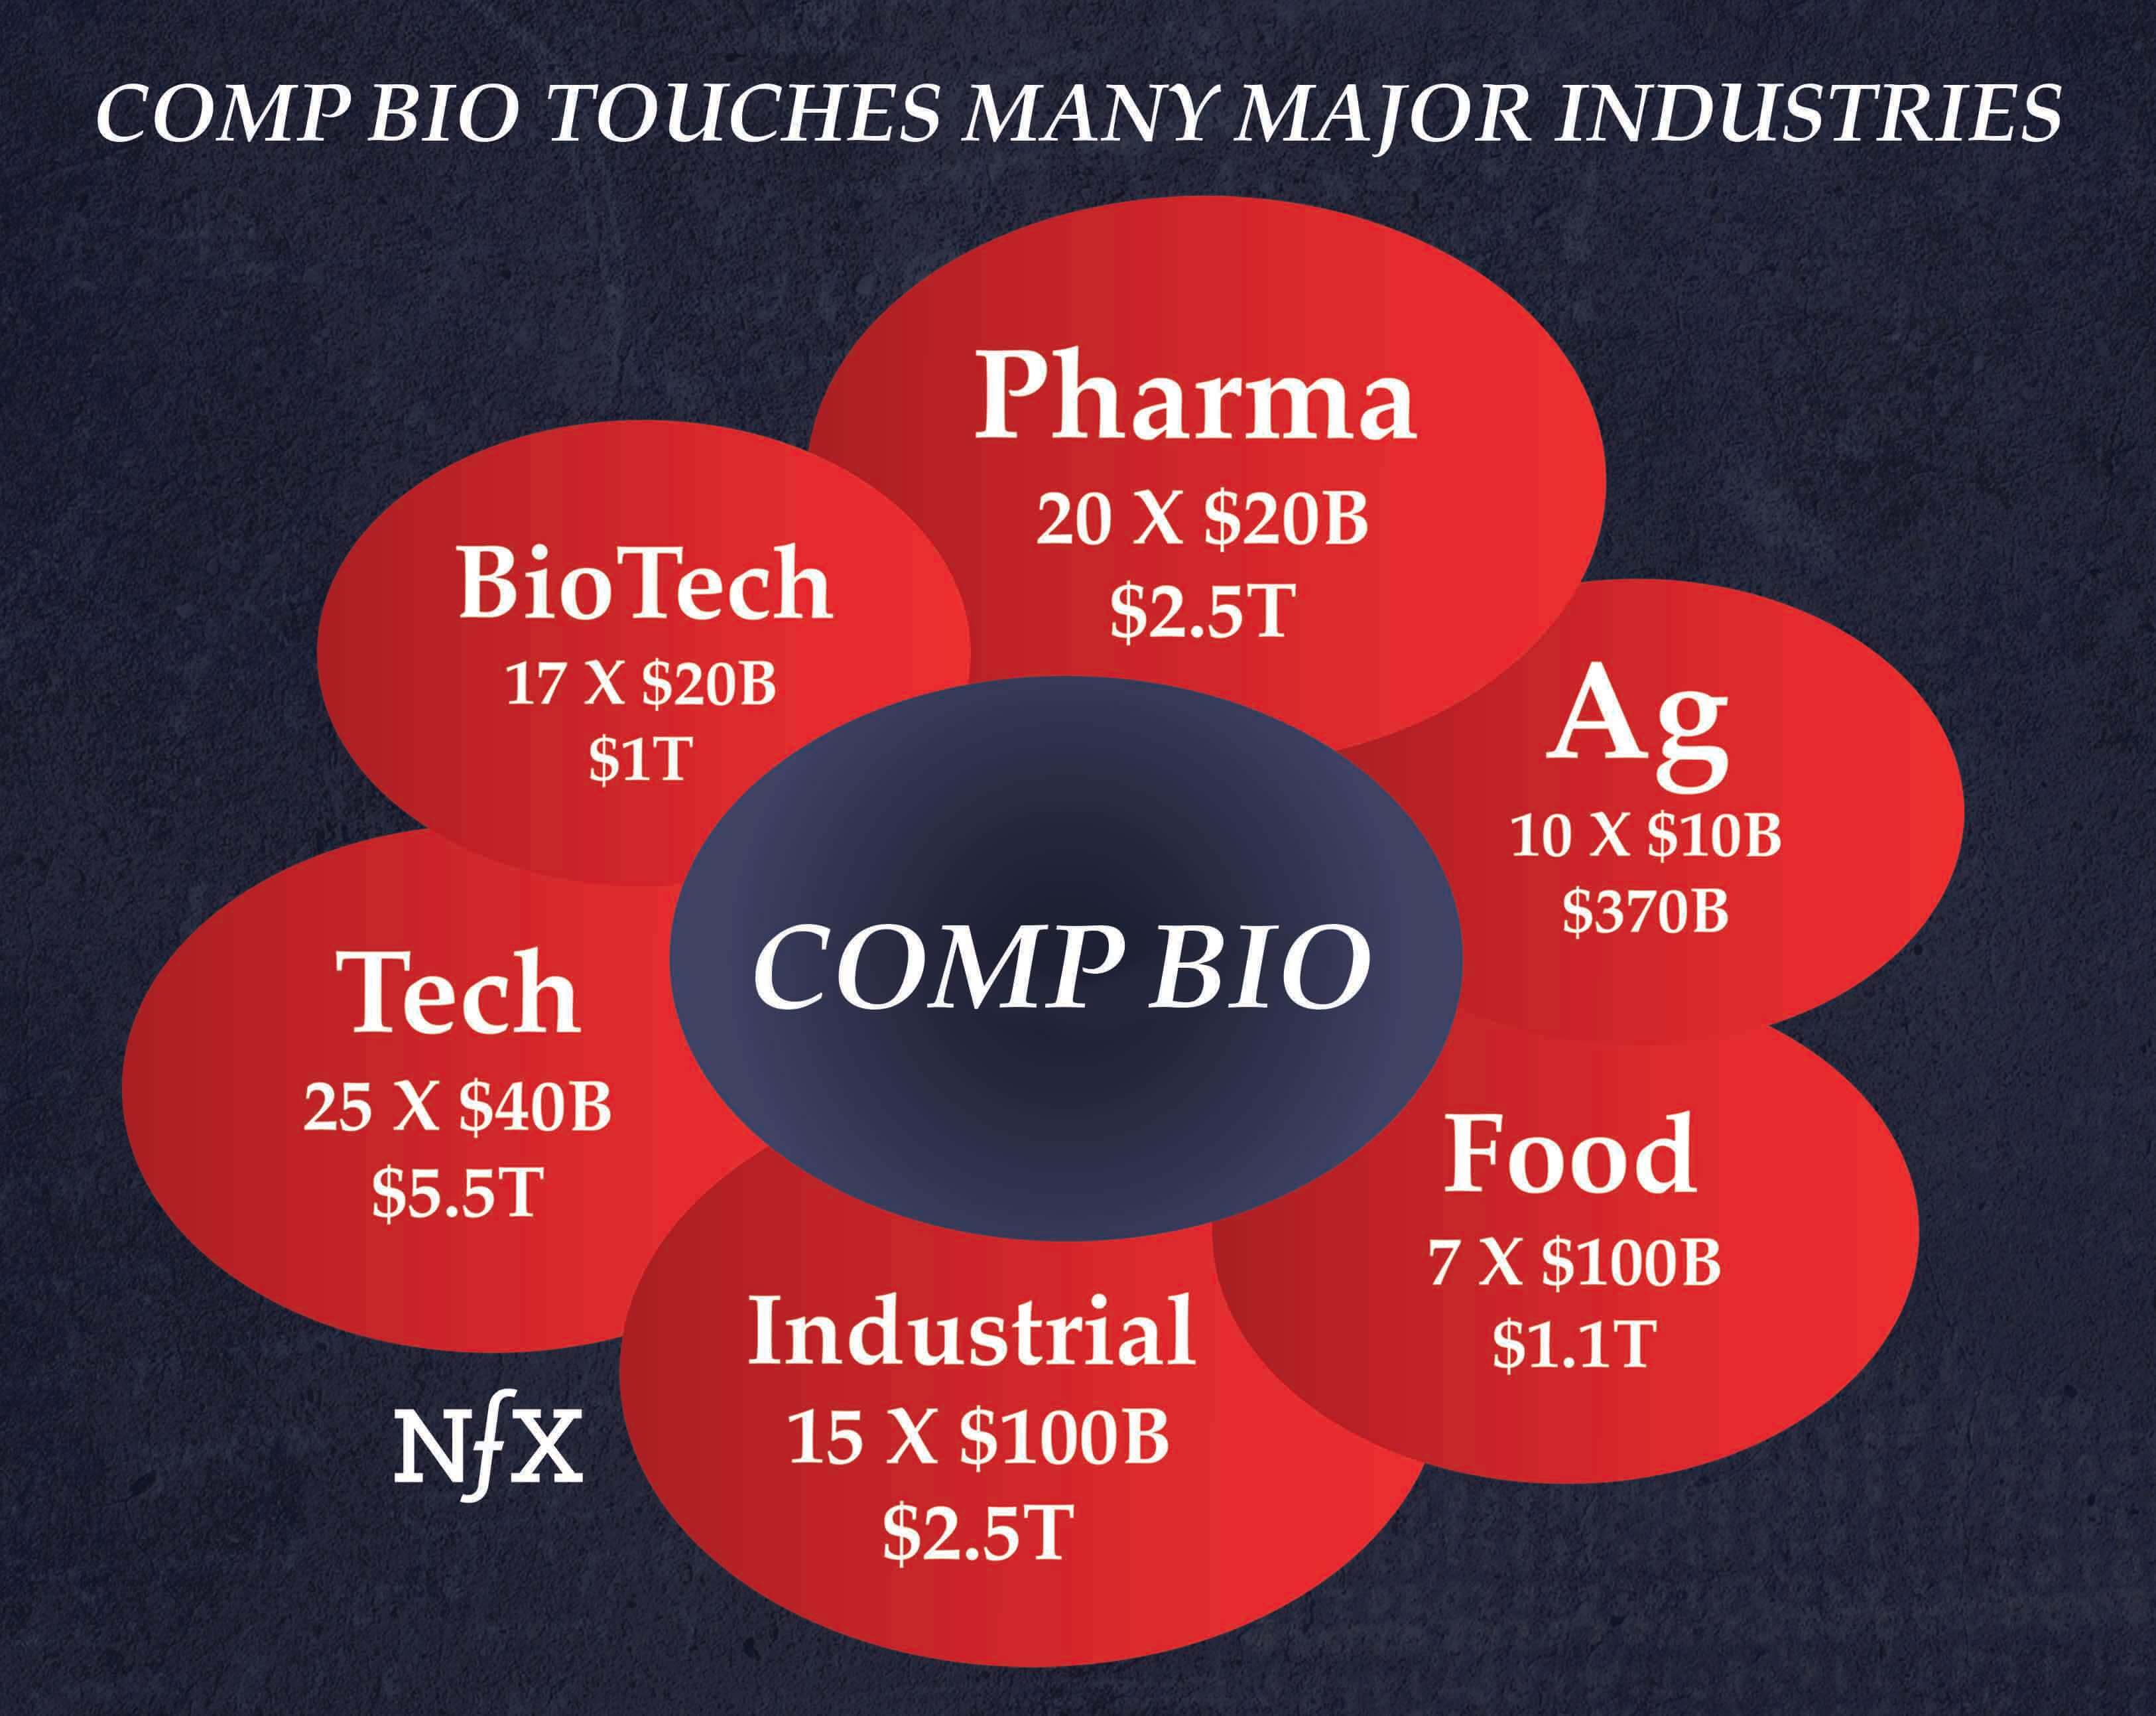 Comp Bio Touches Many Major Industries